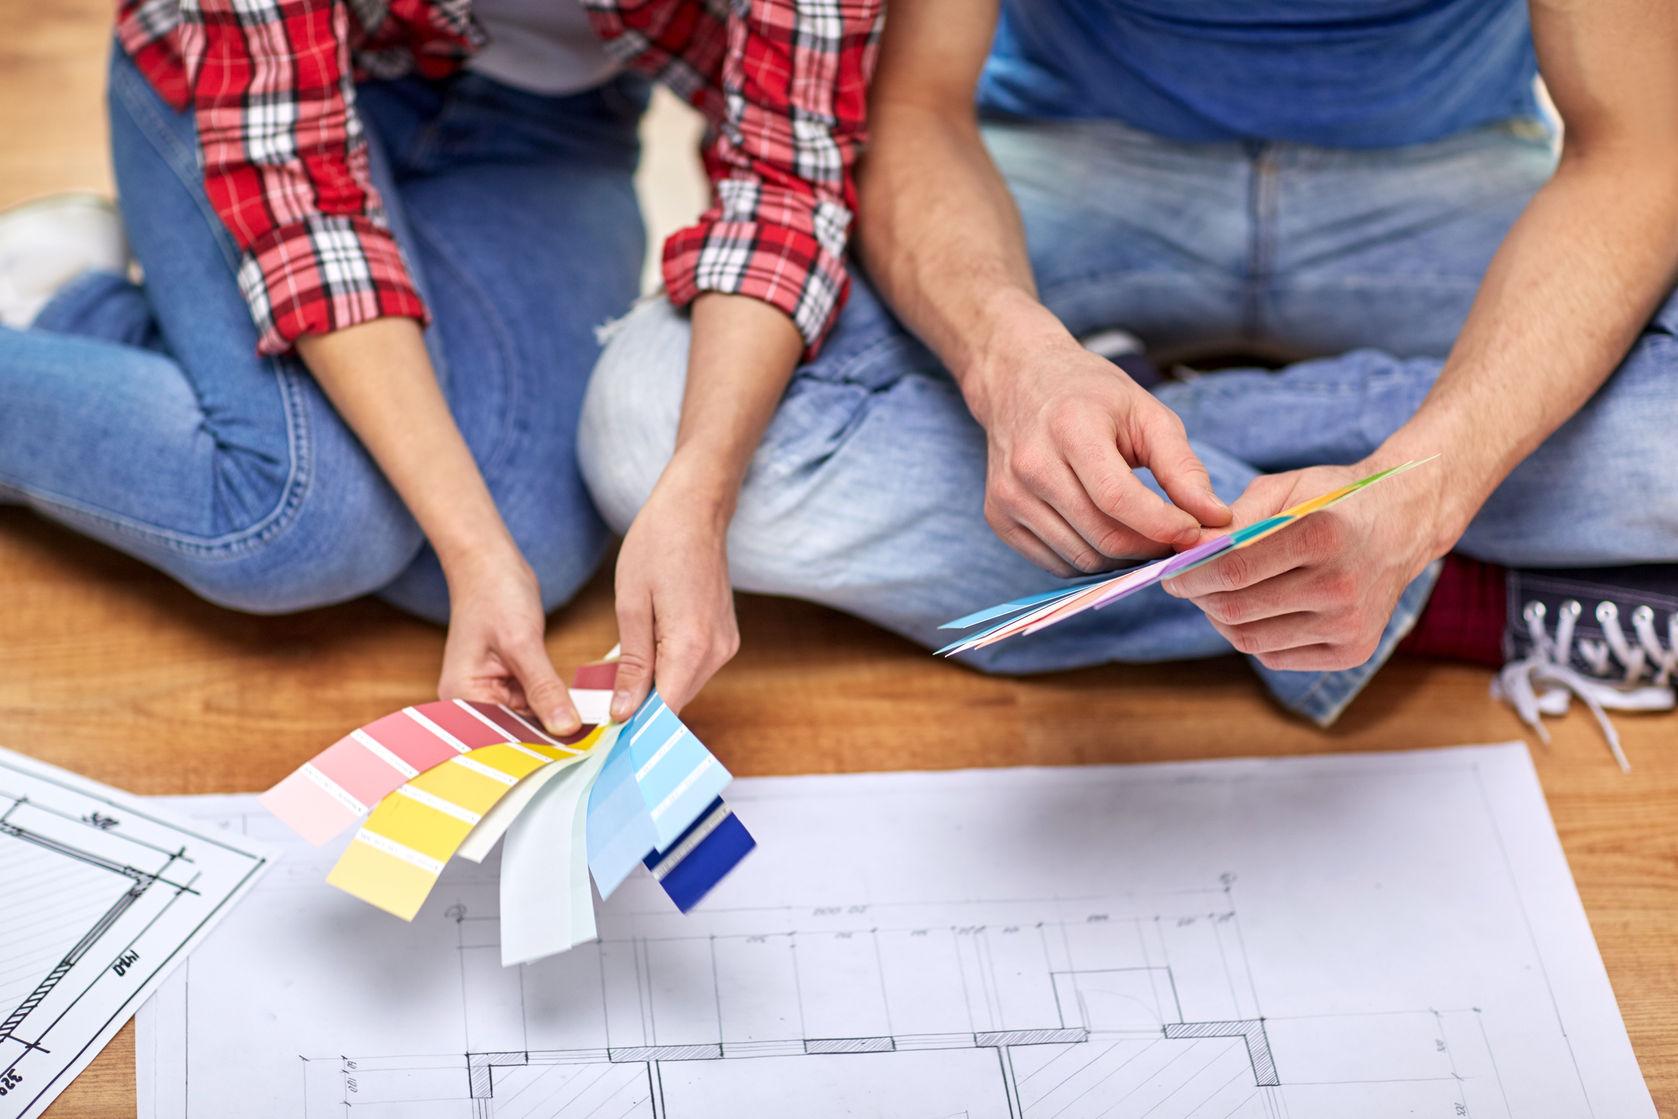 38817498 - design, repair, decoration and people concept - close up of couple with blueprint and color samples sitting on floor at home